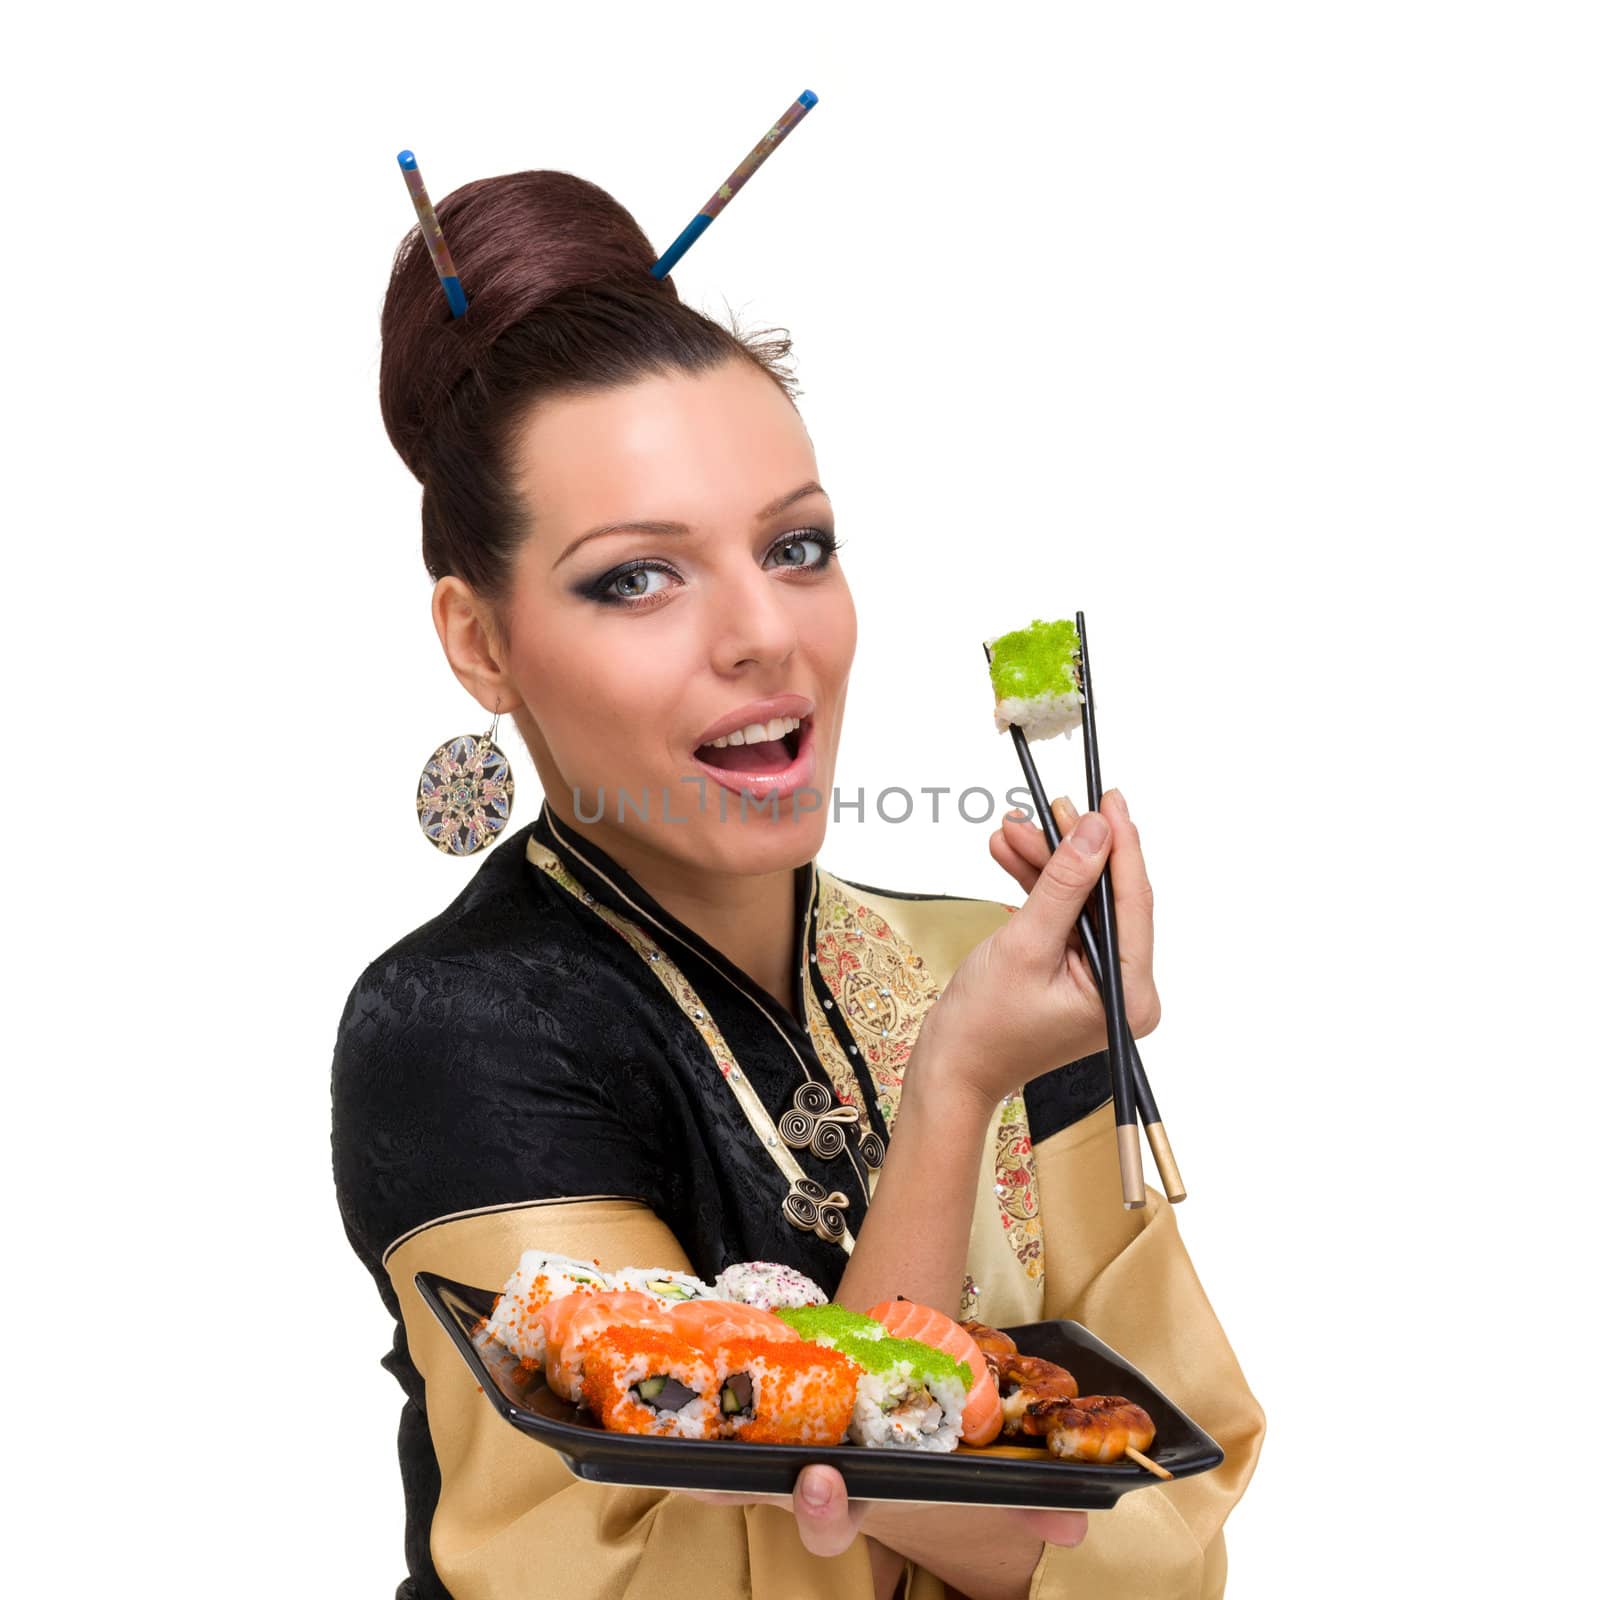 Close up portrait of young woman with sushi, isolated on white background.